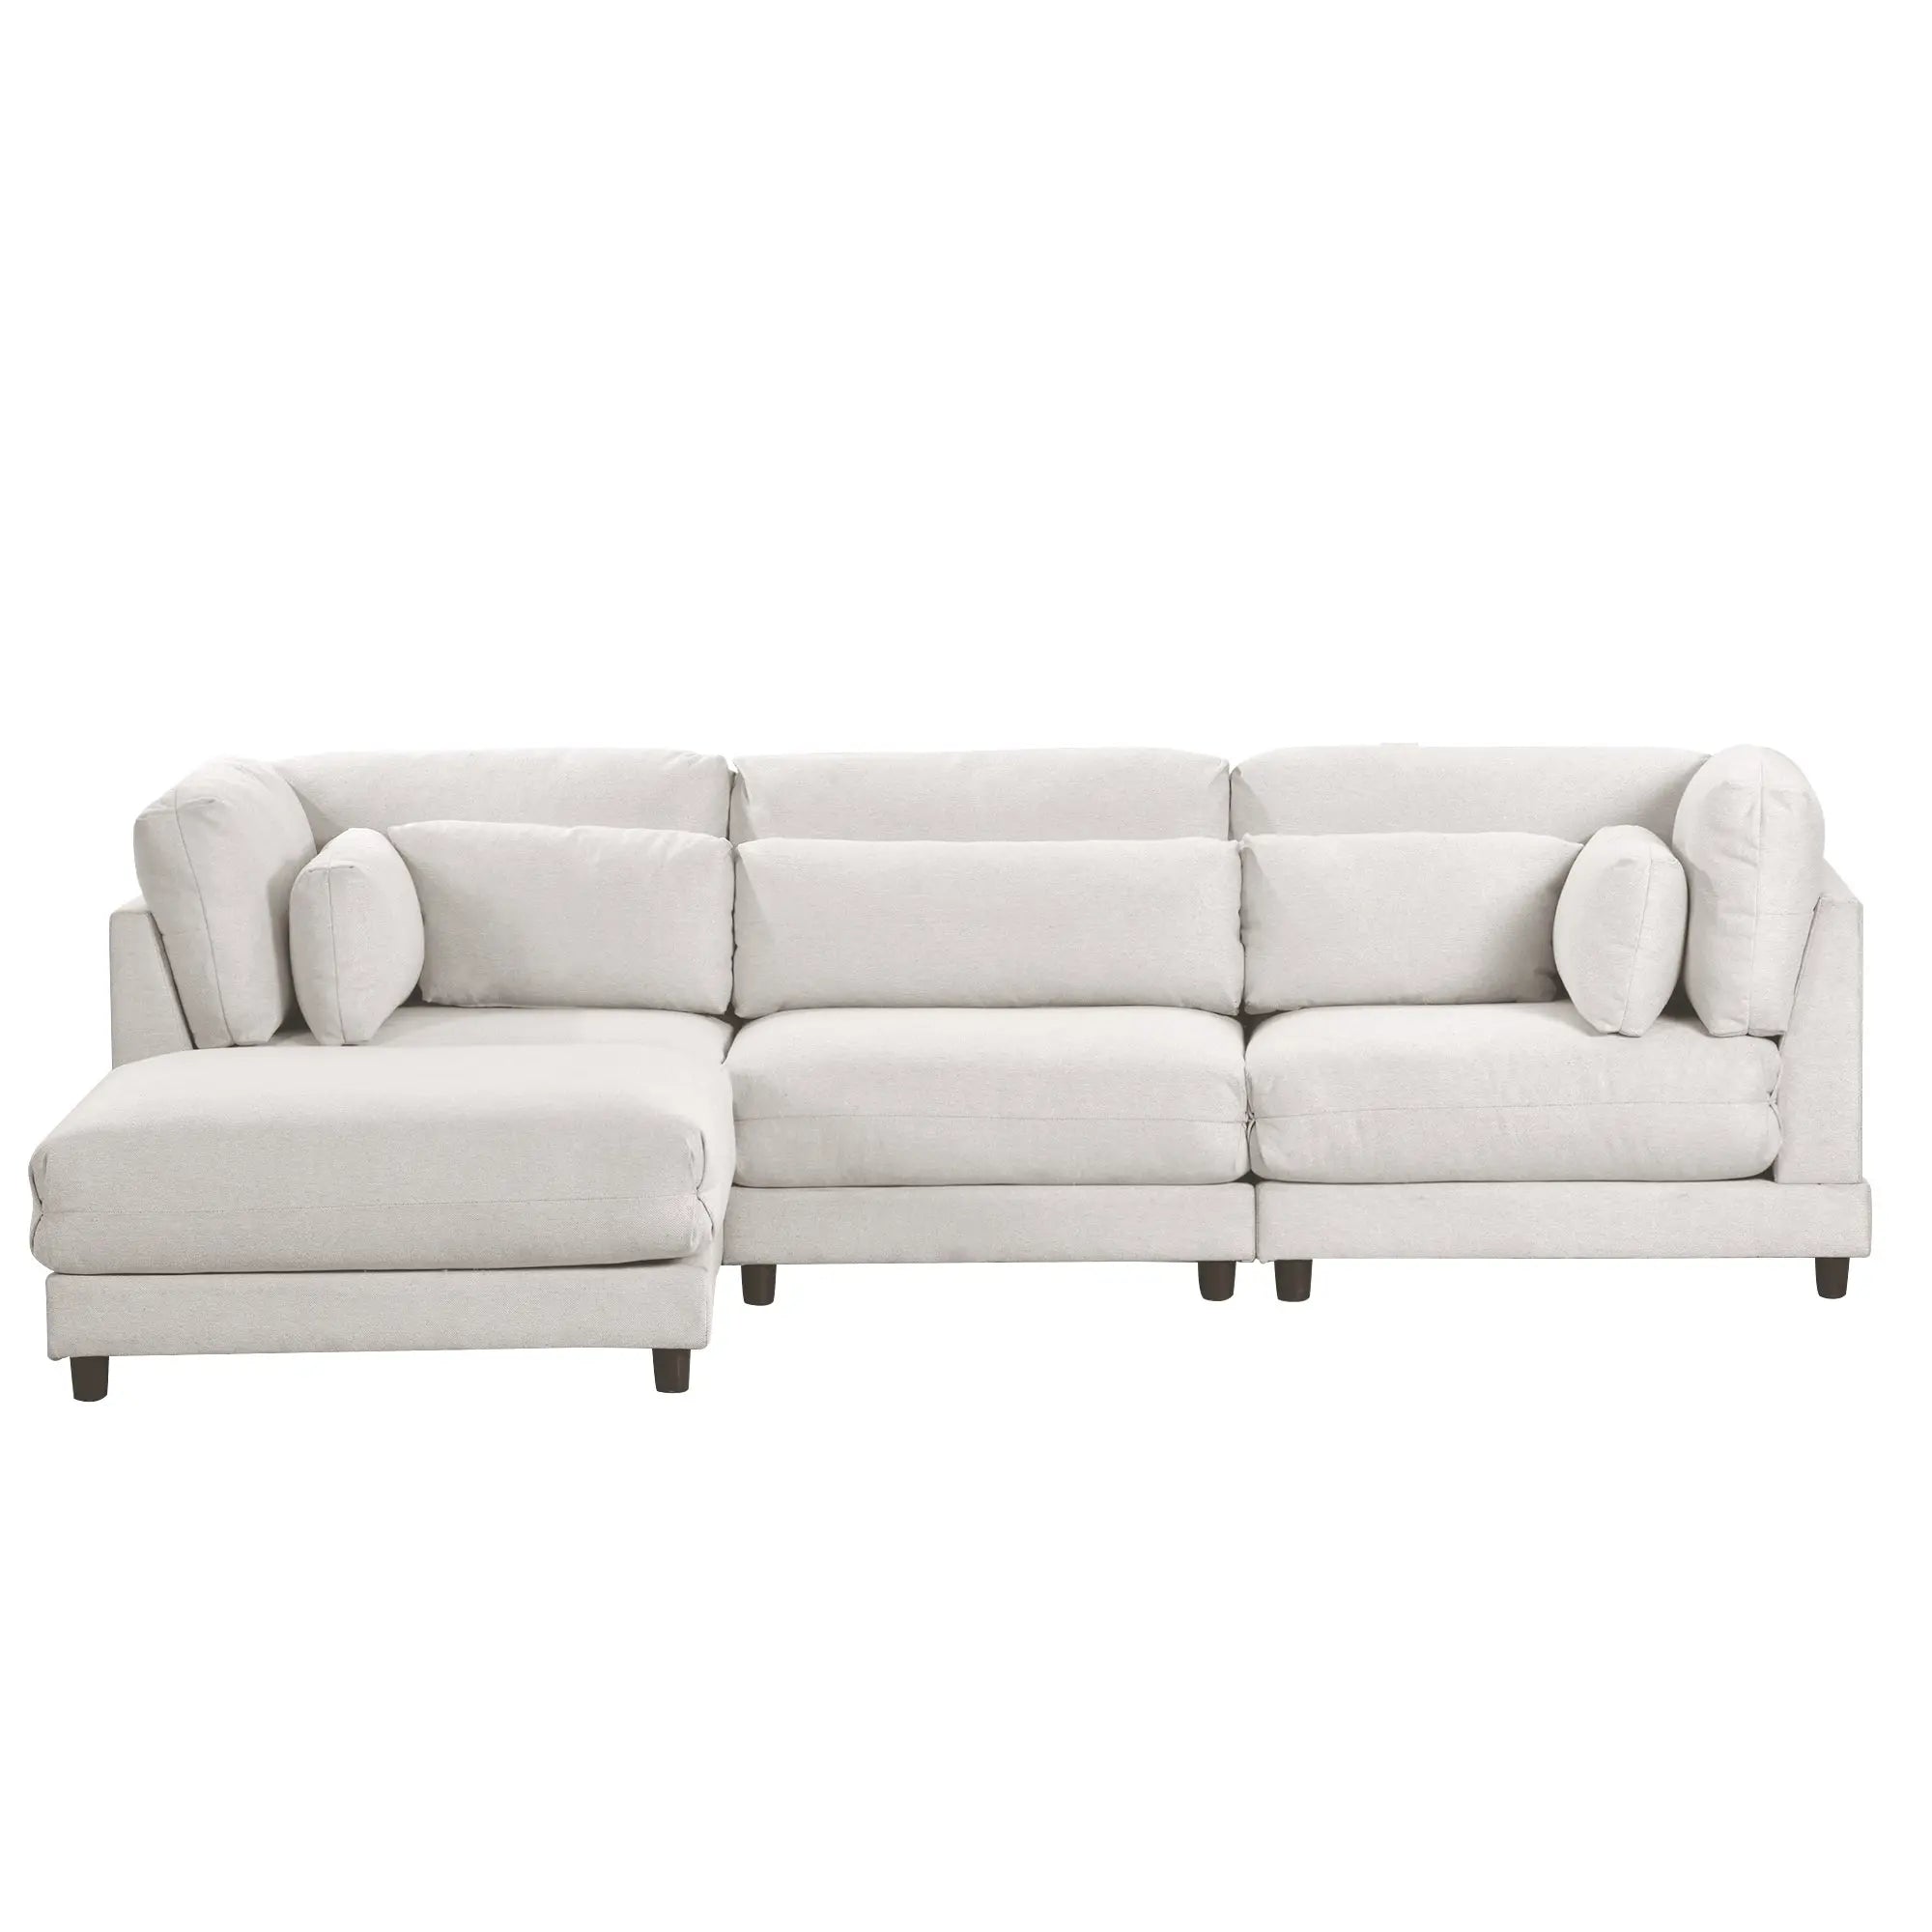 Bellemave 110.6" 2 Pieces L shaped Sofa with Removable Ottomans and comfortable waist pillows Bellemave